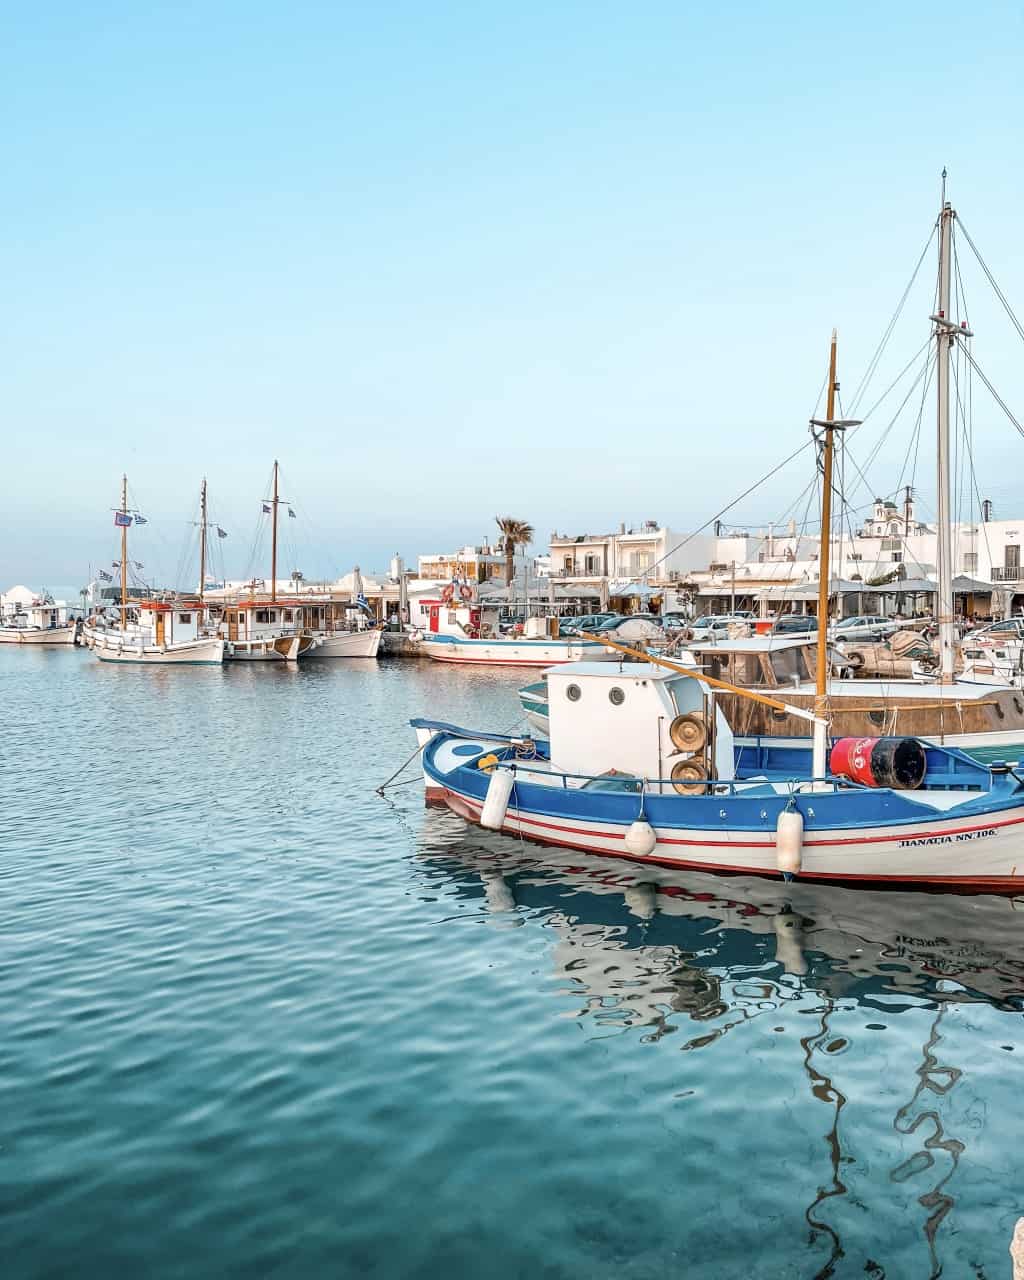 The charming Port of Naoussa in Paros, Greece, adorned with colorful fishing boats